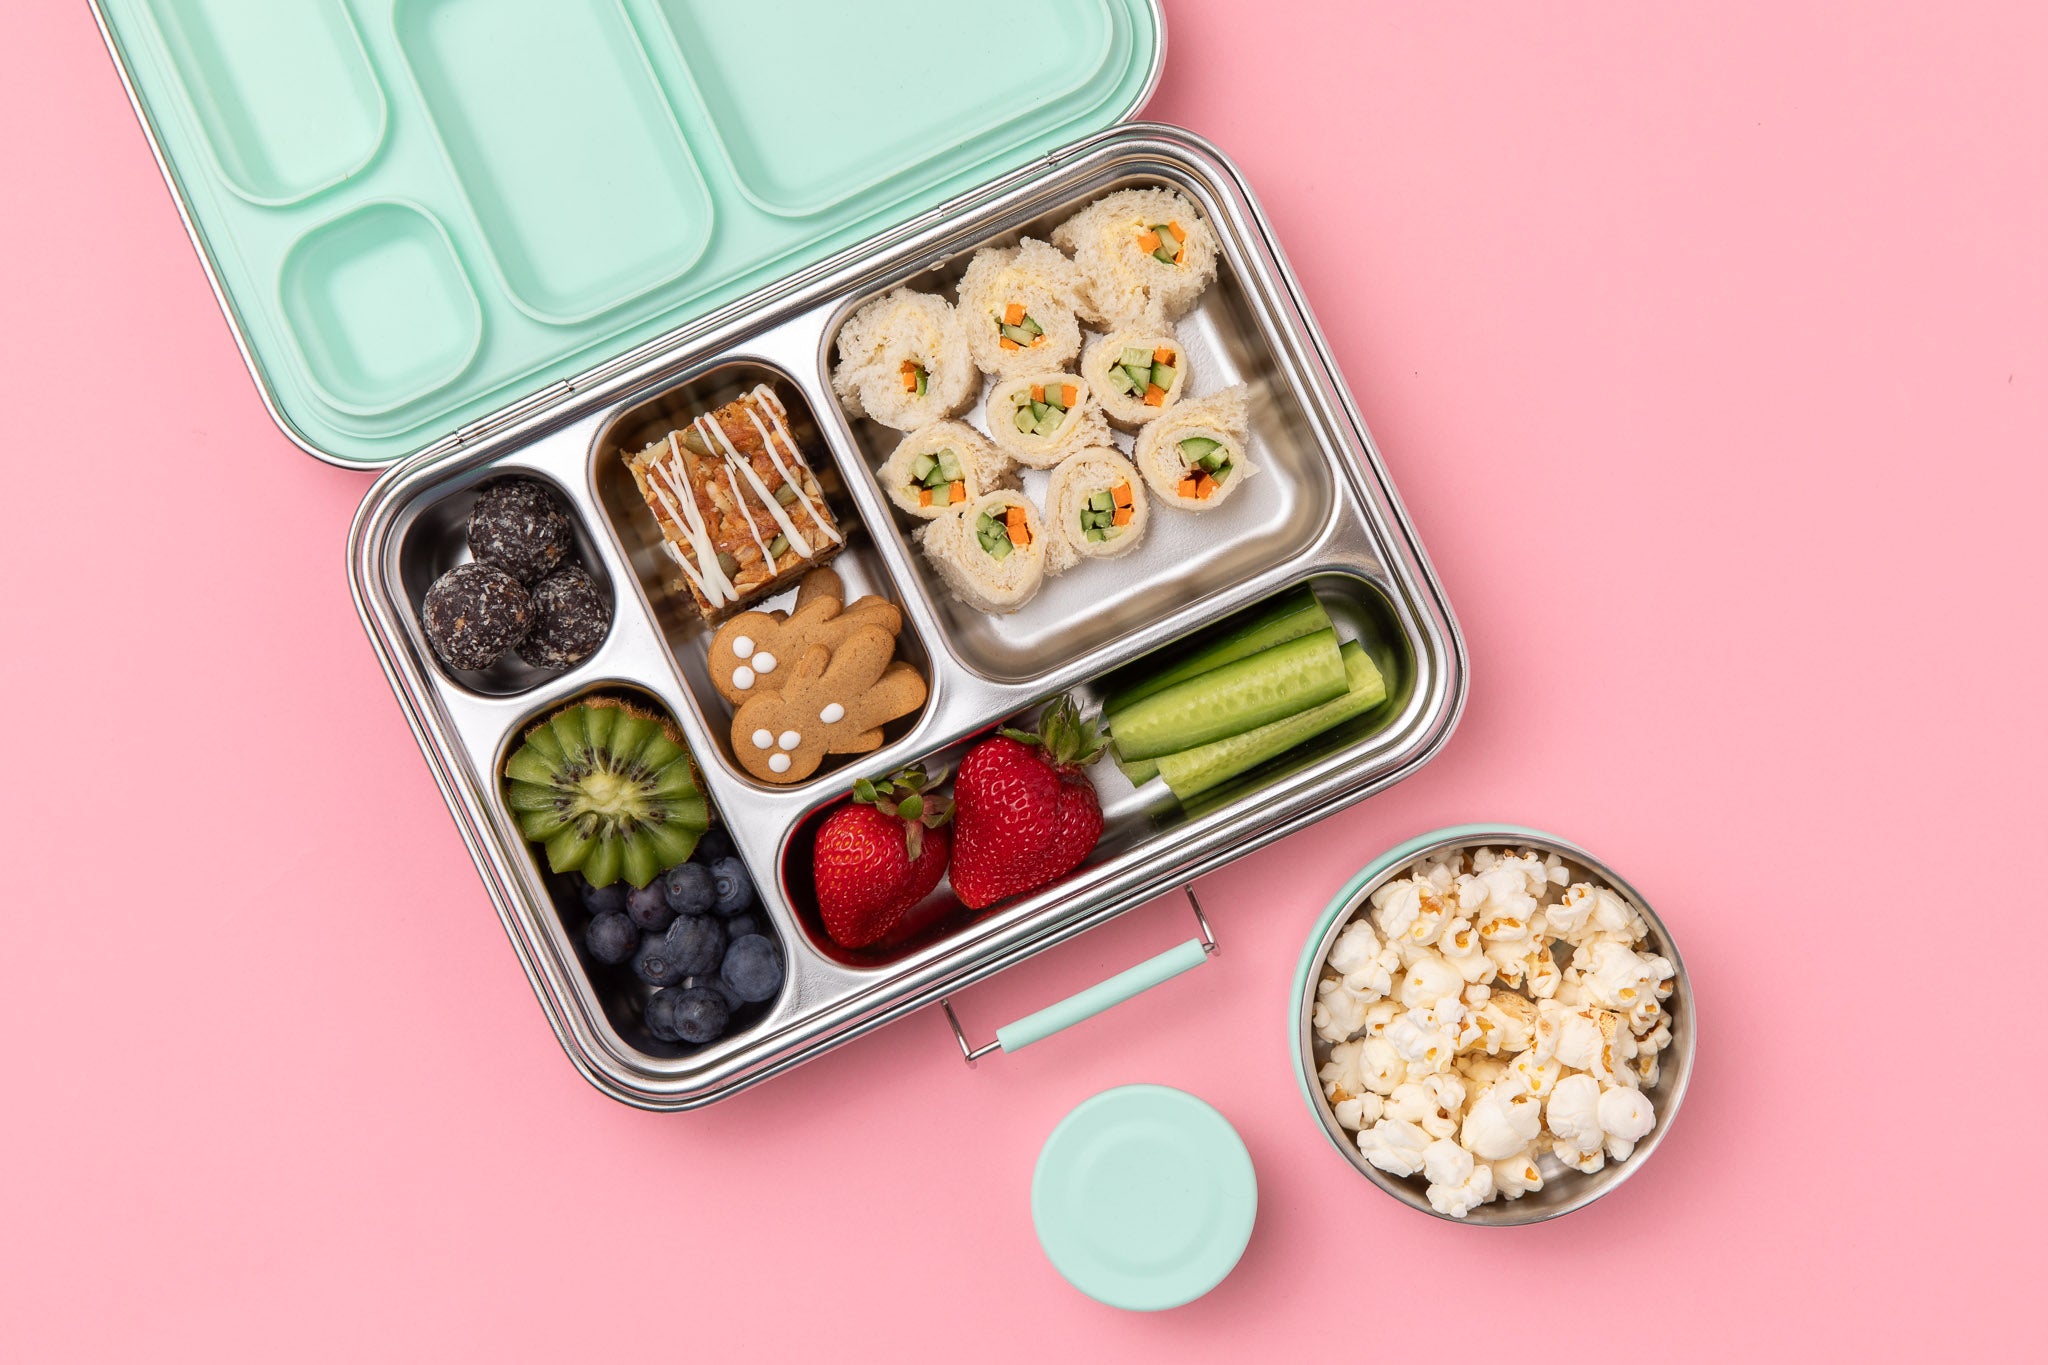 nudie rudie lunch box leak proof stainless steel bento style lunchbox with mint removable silicone seal on lid. comes with 2 additional snack pots